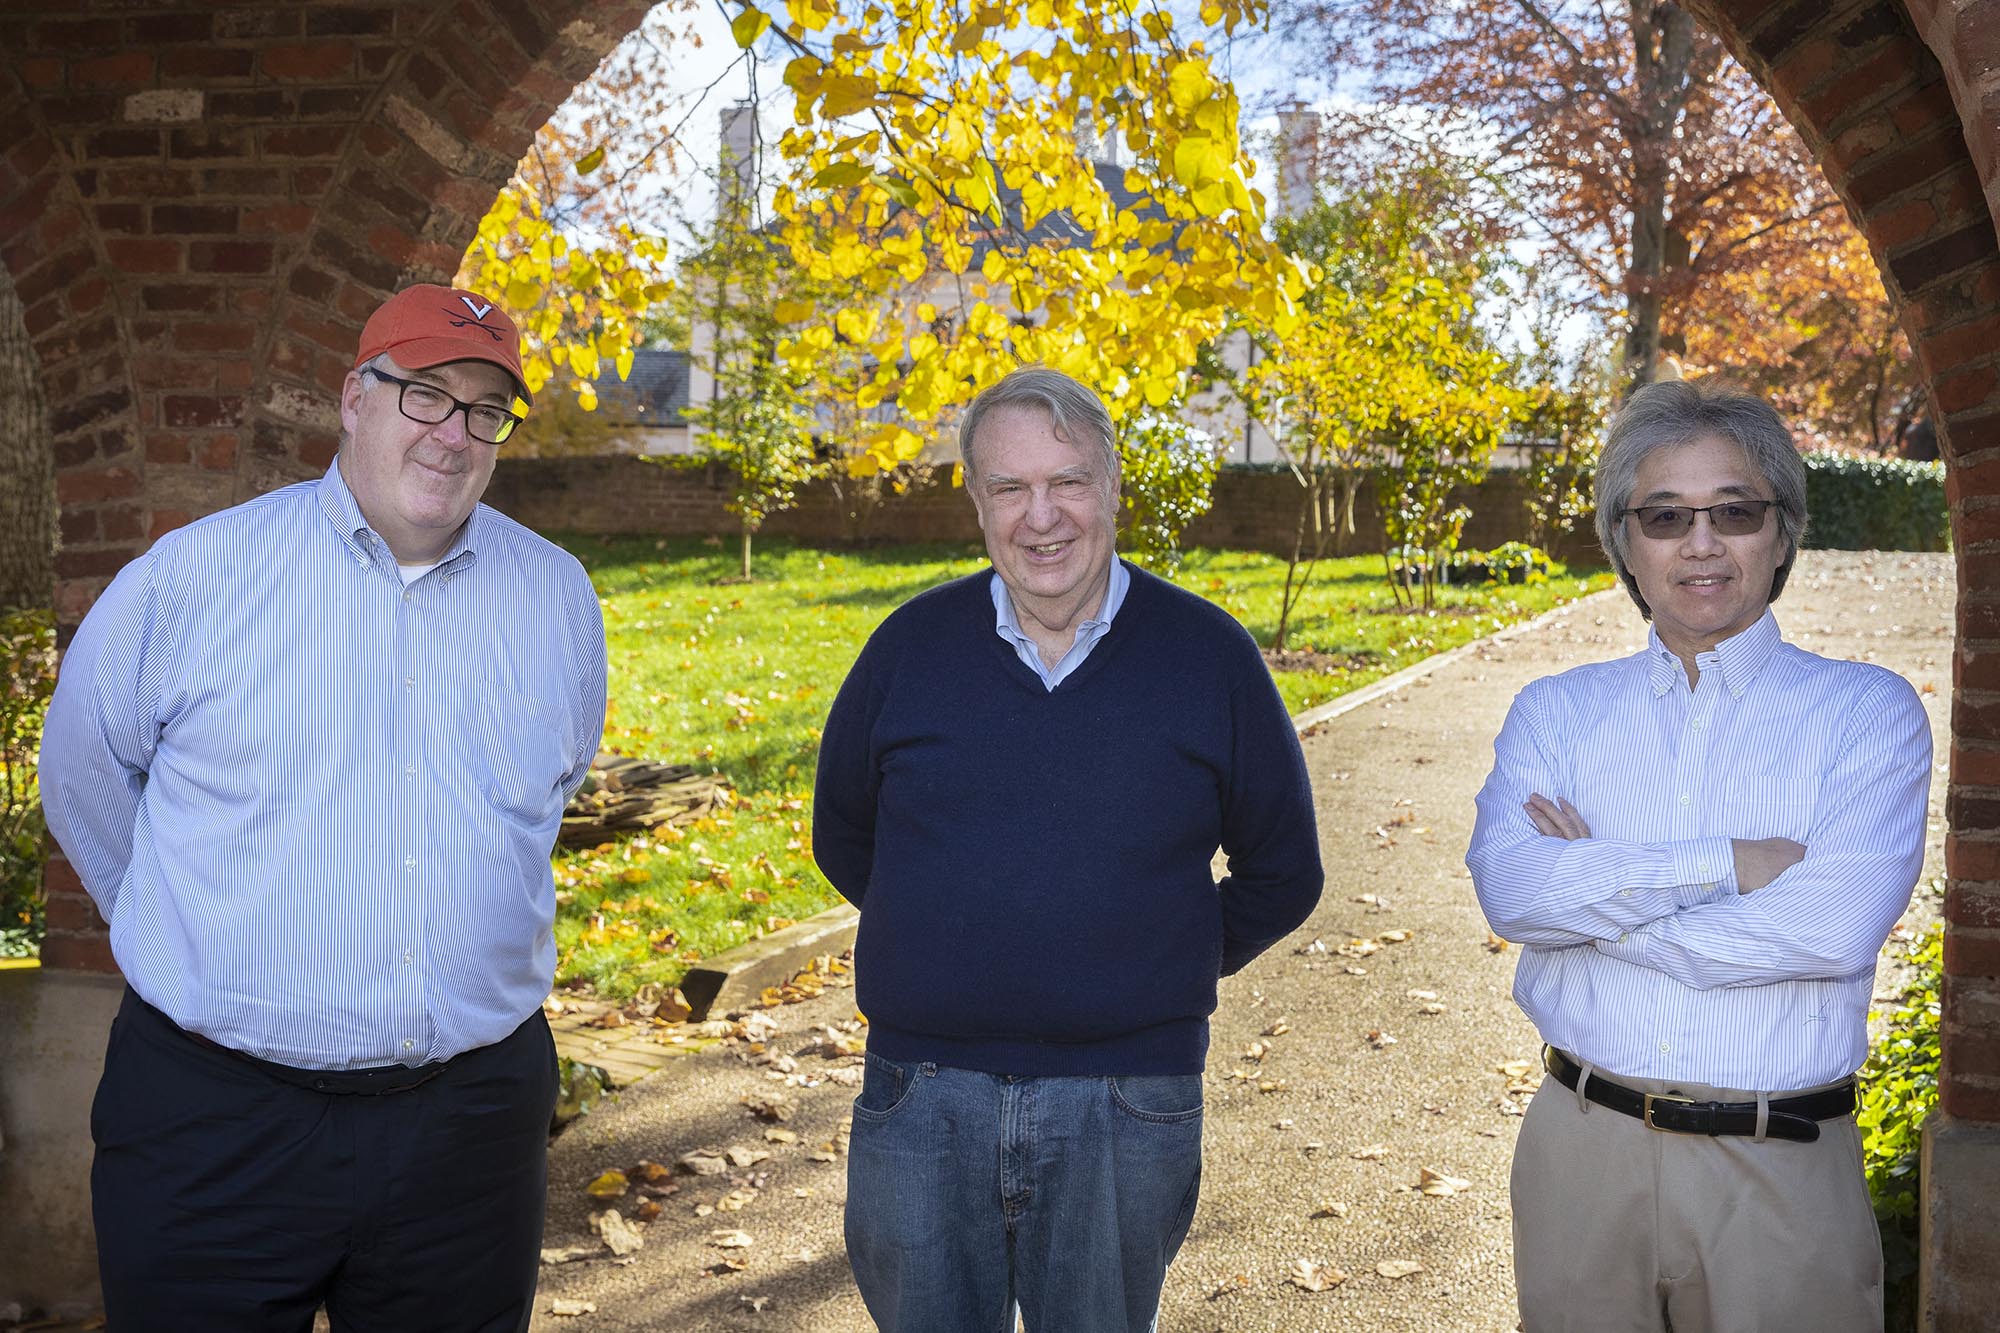 From left,Richard Diemer, Dick Crawford and Jim Cheng  stand together